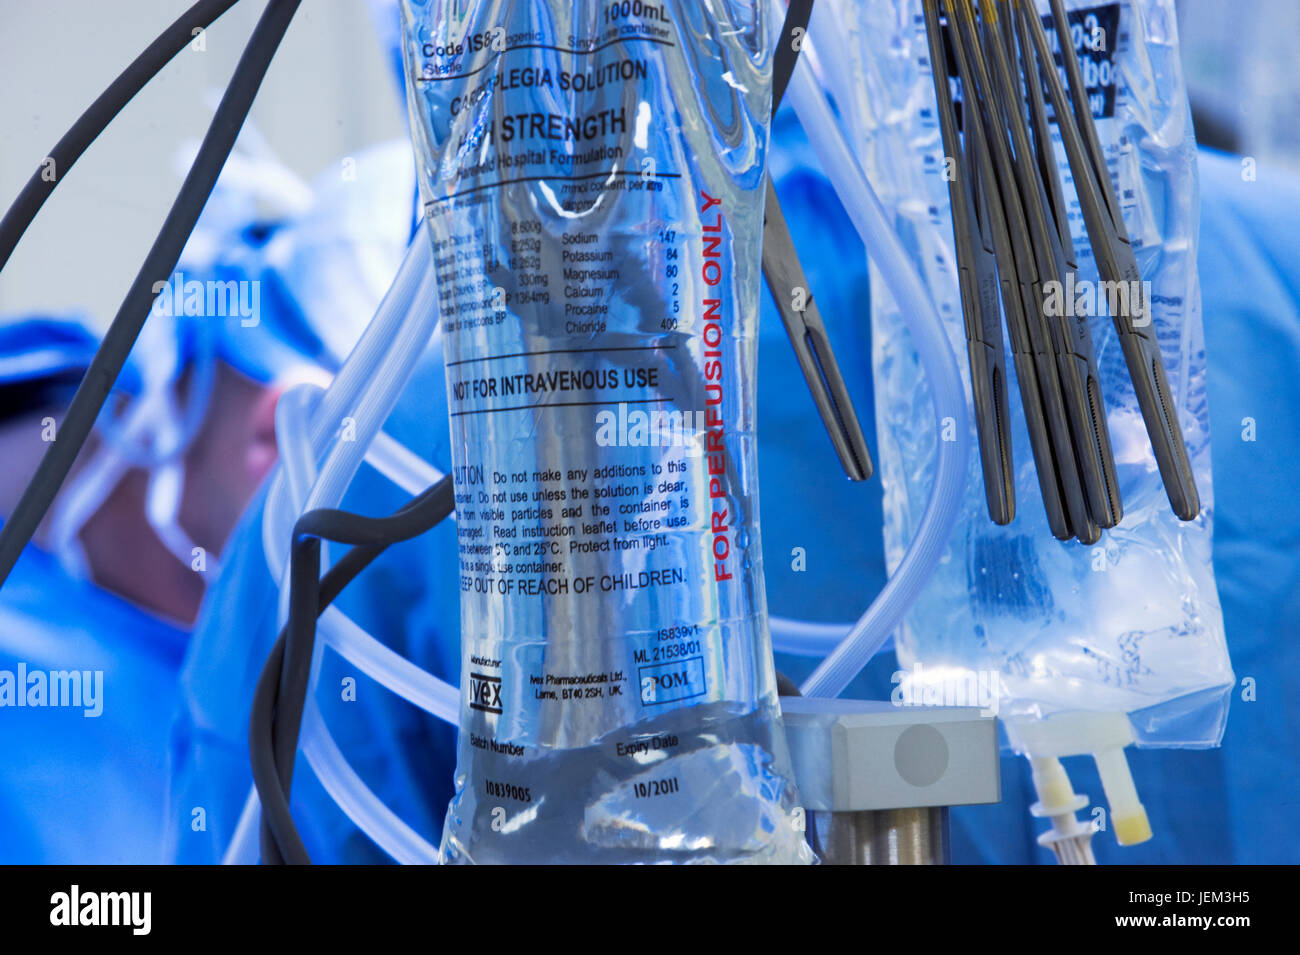 A high-strength cardioplegia solution hangs on a drip stand during a cardiac operation for infusion into the patient's circulation. Stock Photo